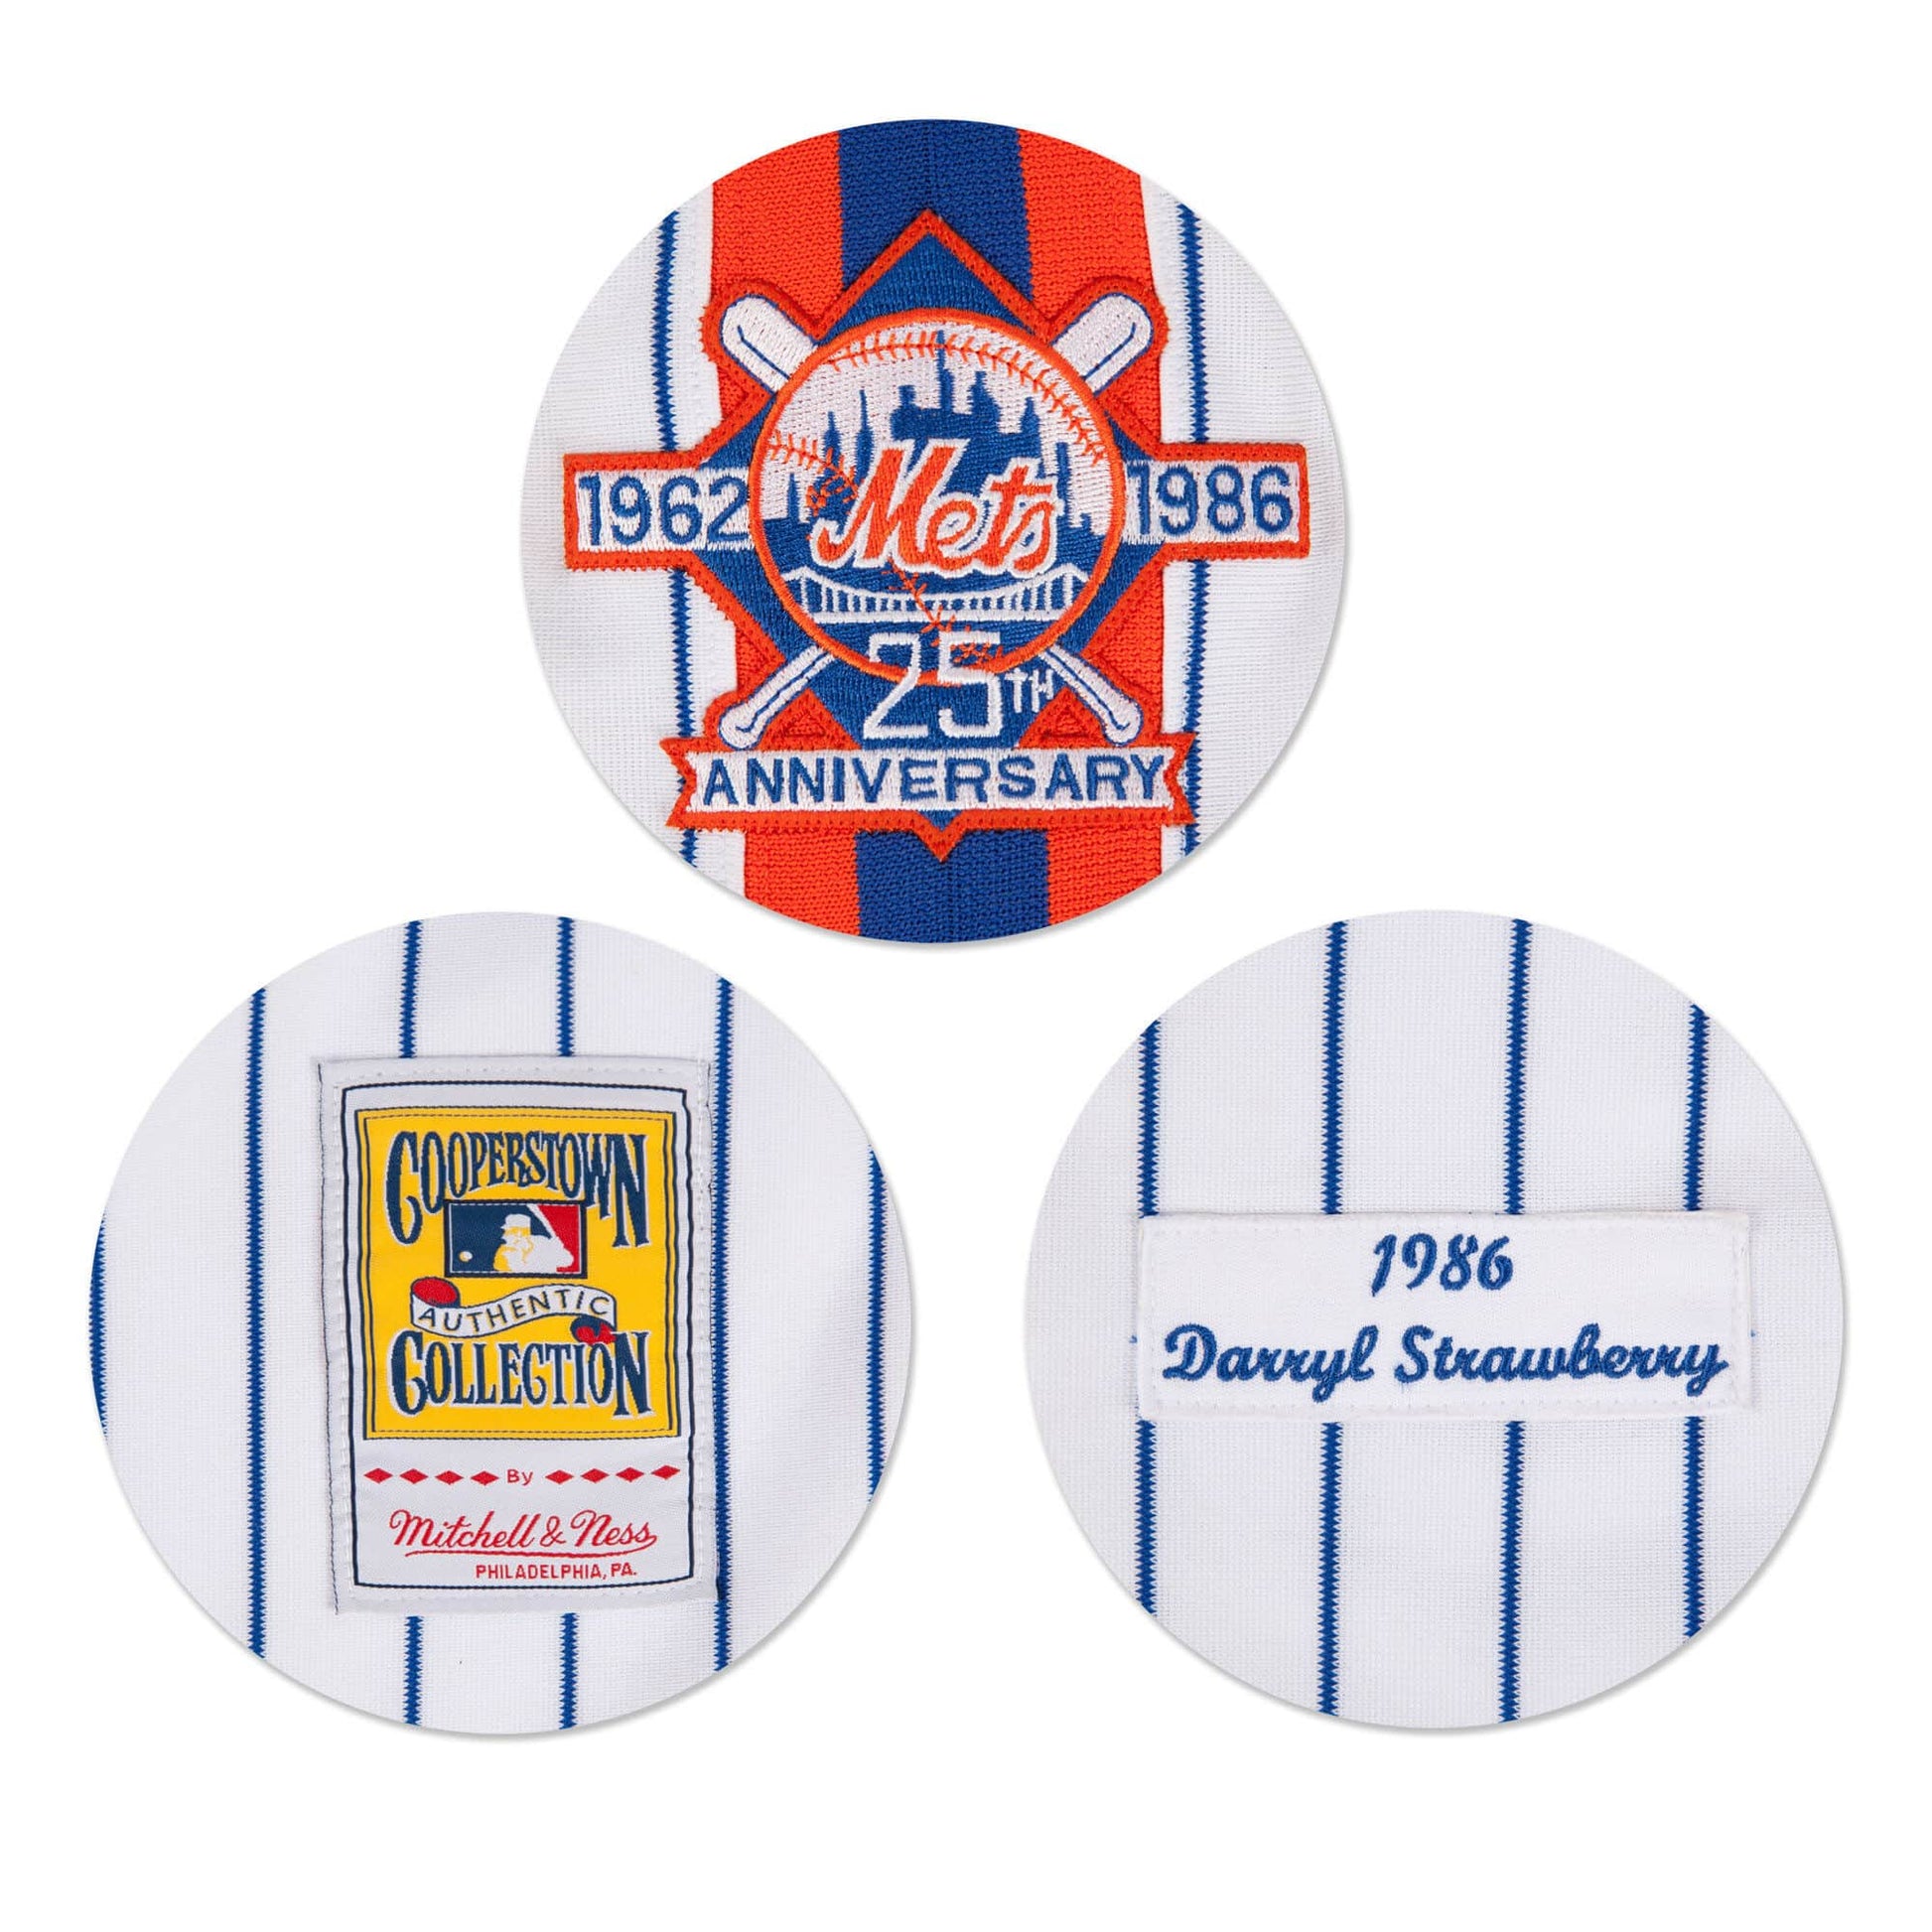 MLB Authentic Jersey New York Mets 1986 Darryl Strawberry #18 –  Broskiclothing